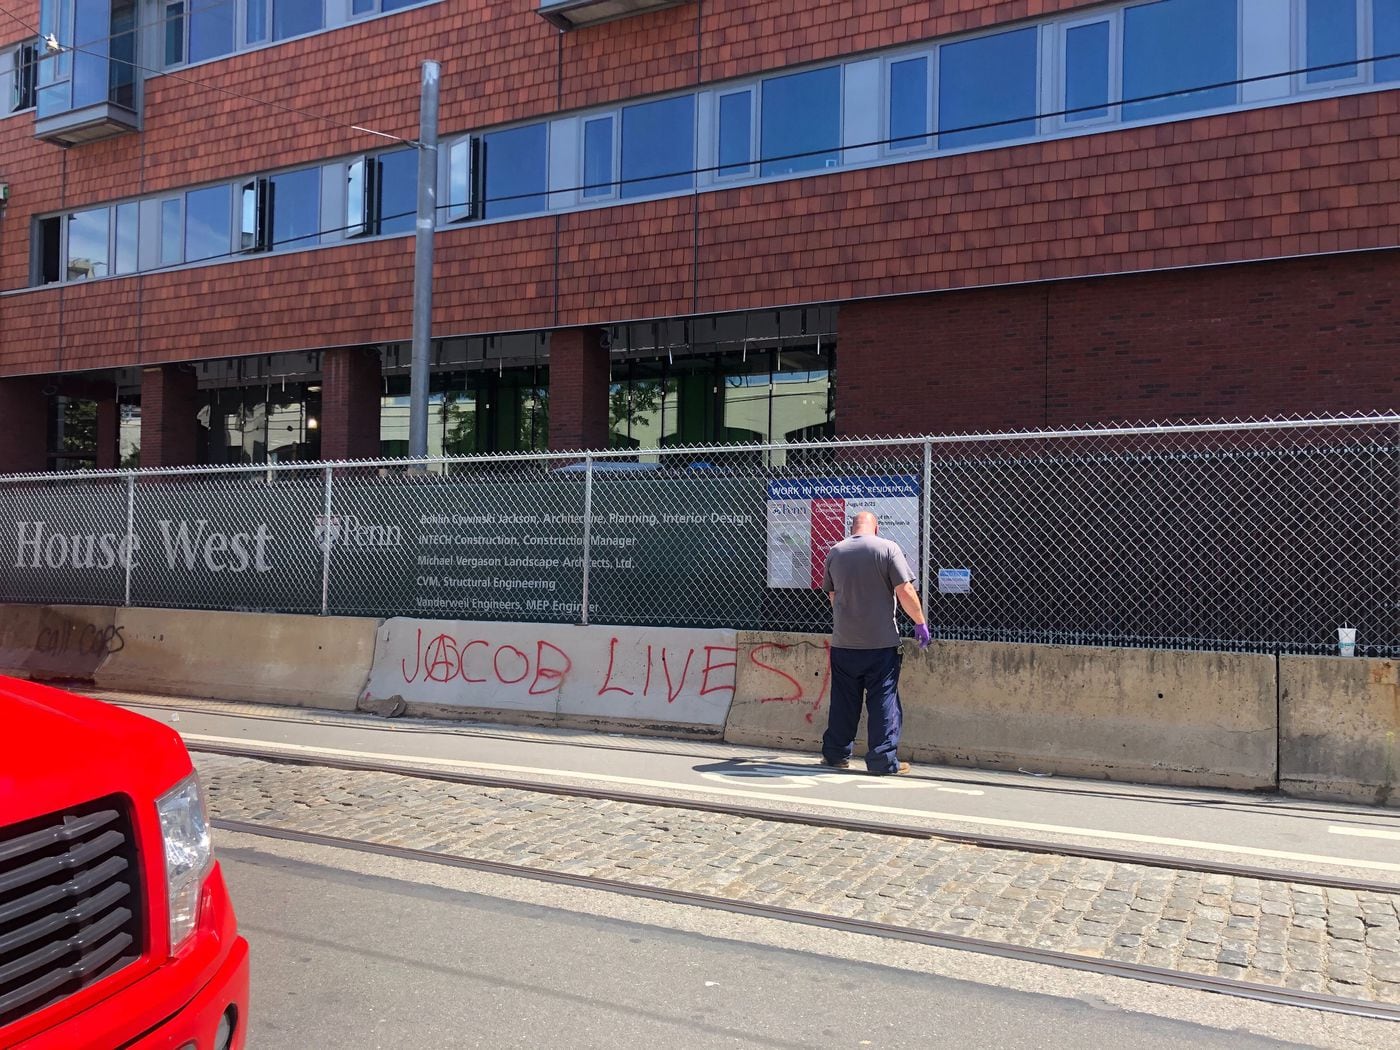 A worker power washes graffiti off of a construction barrier outside of a University of Pennsylvania residence hall Wednesday morning after a night of unrest saw demonstrators vandalizing buildings and breaking windows along 40th Street in West Philadelphia.